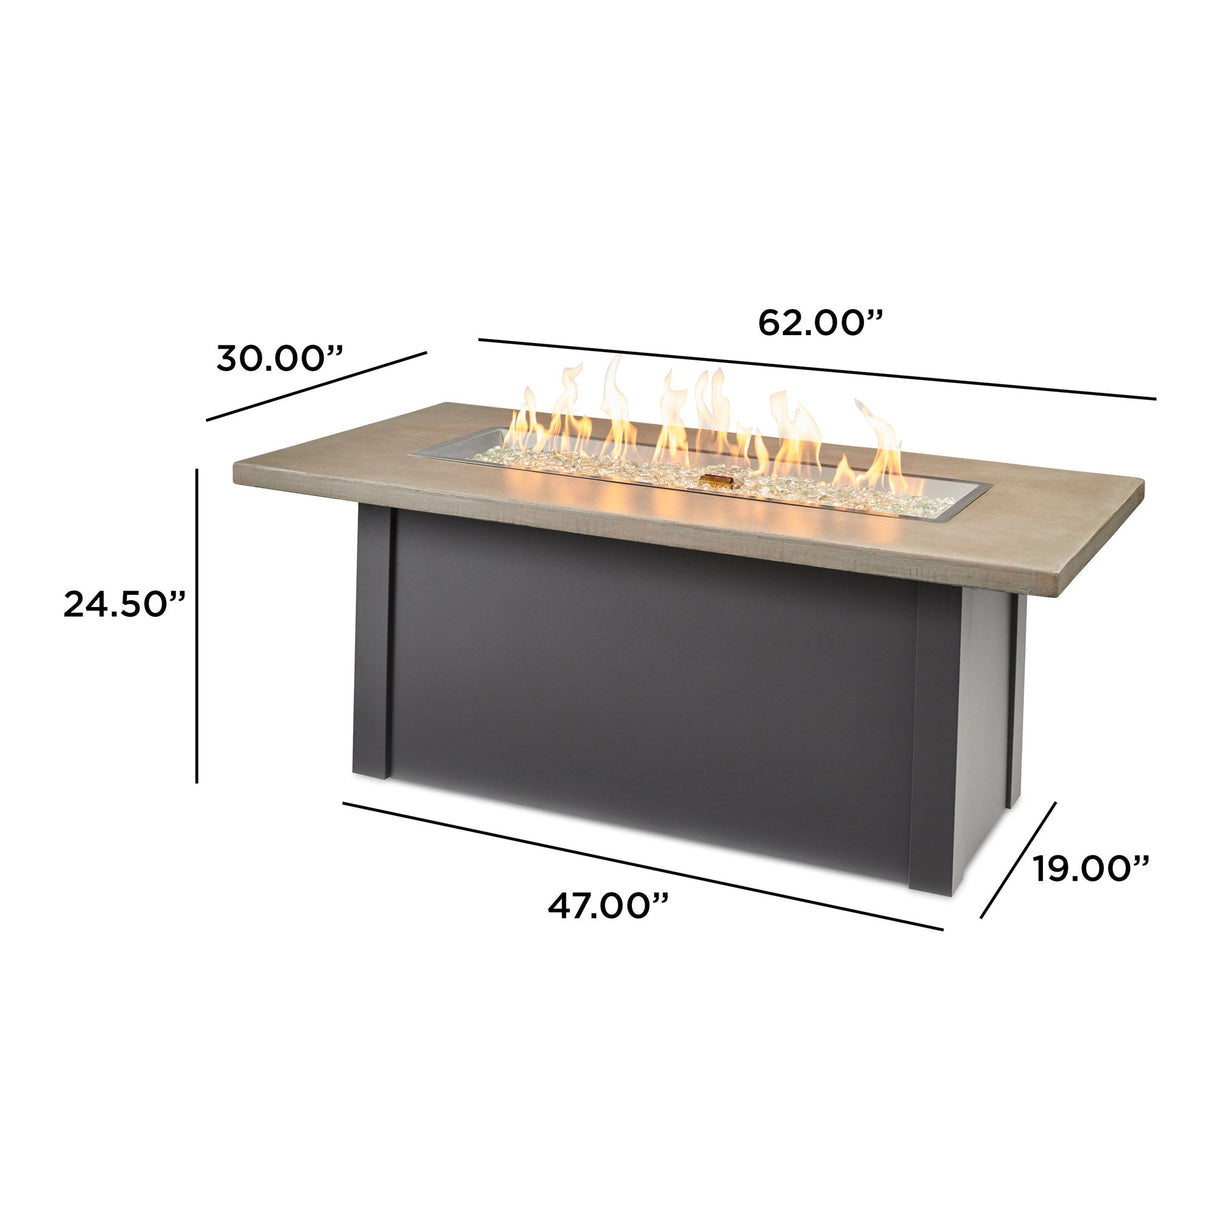 Dimensions overlaid on the Havenwood Linear Gas Fire Pit Table with a Pebble Grey top and Graphite Grey base